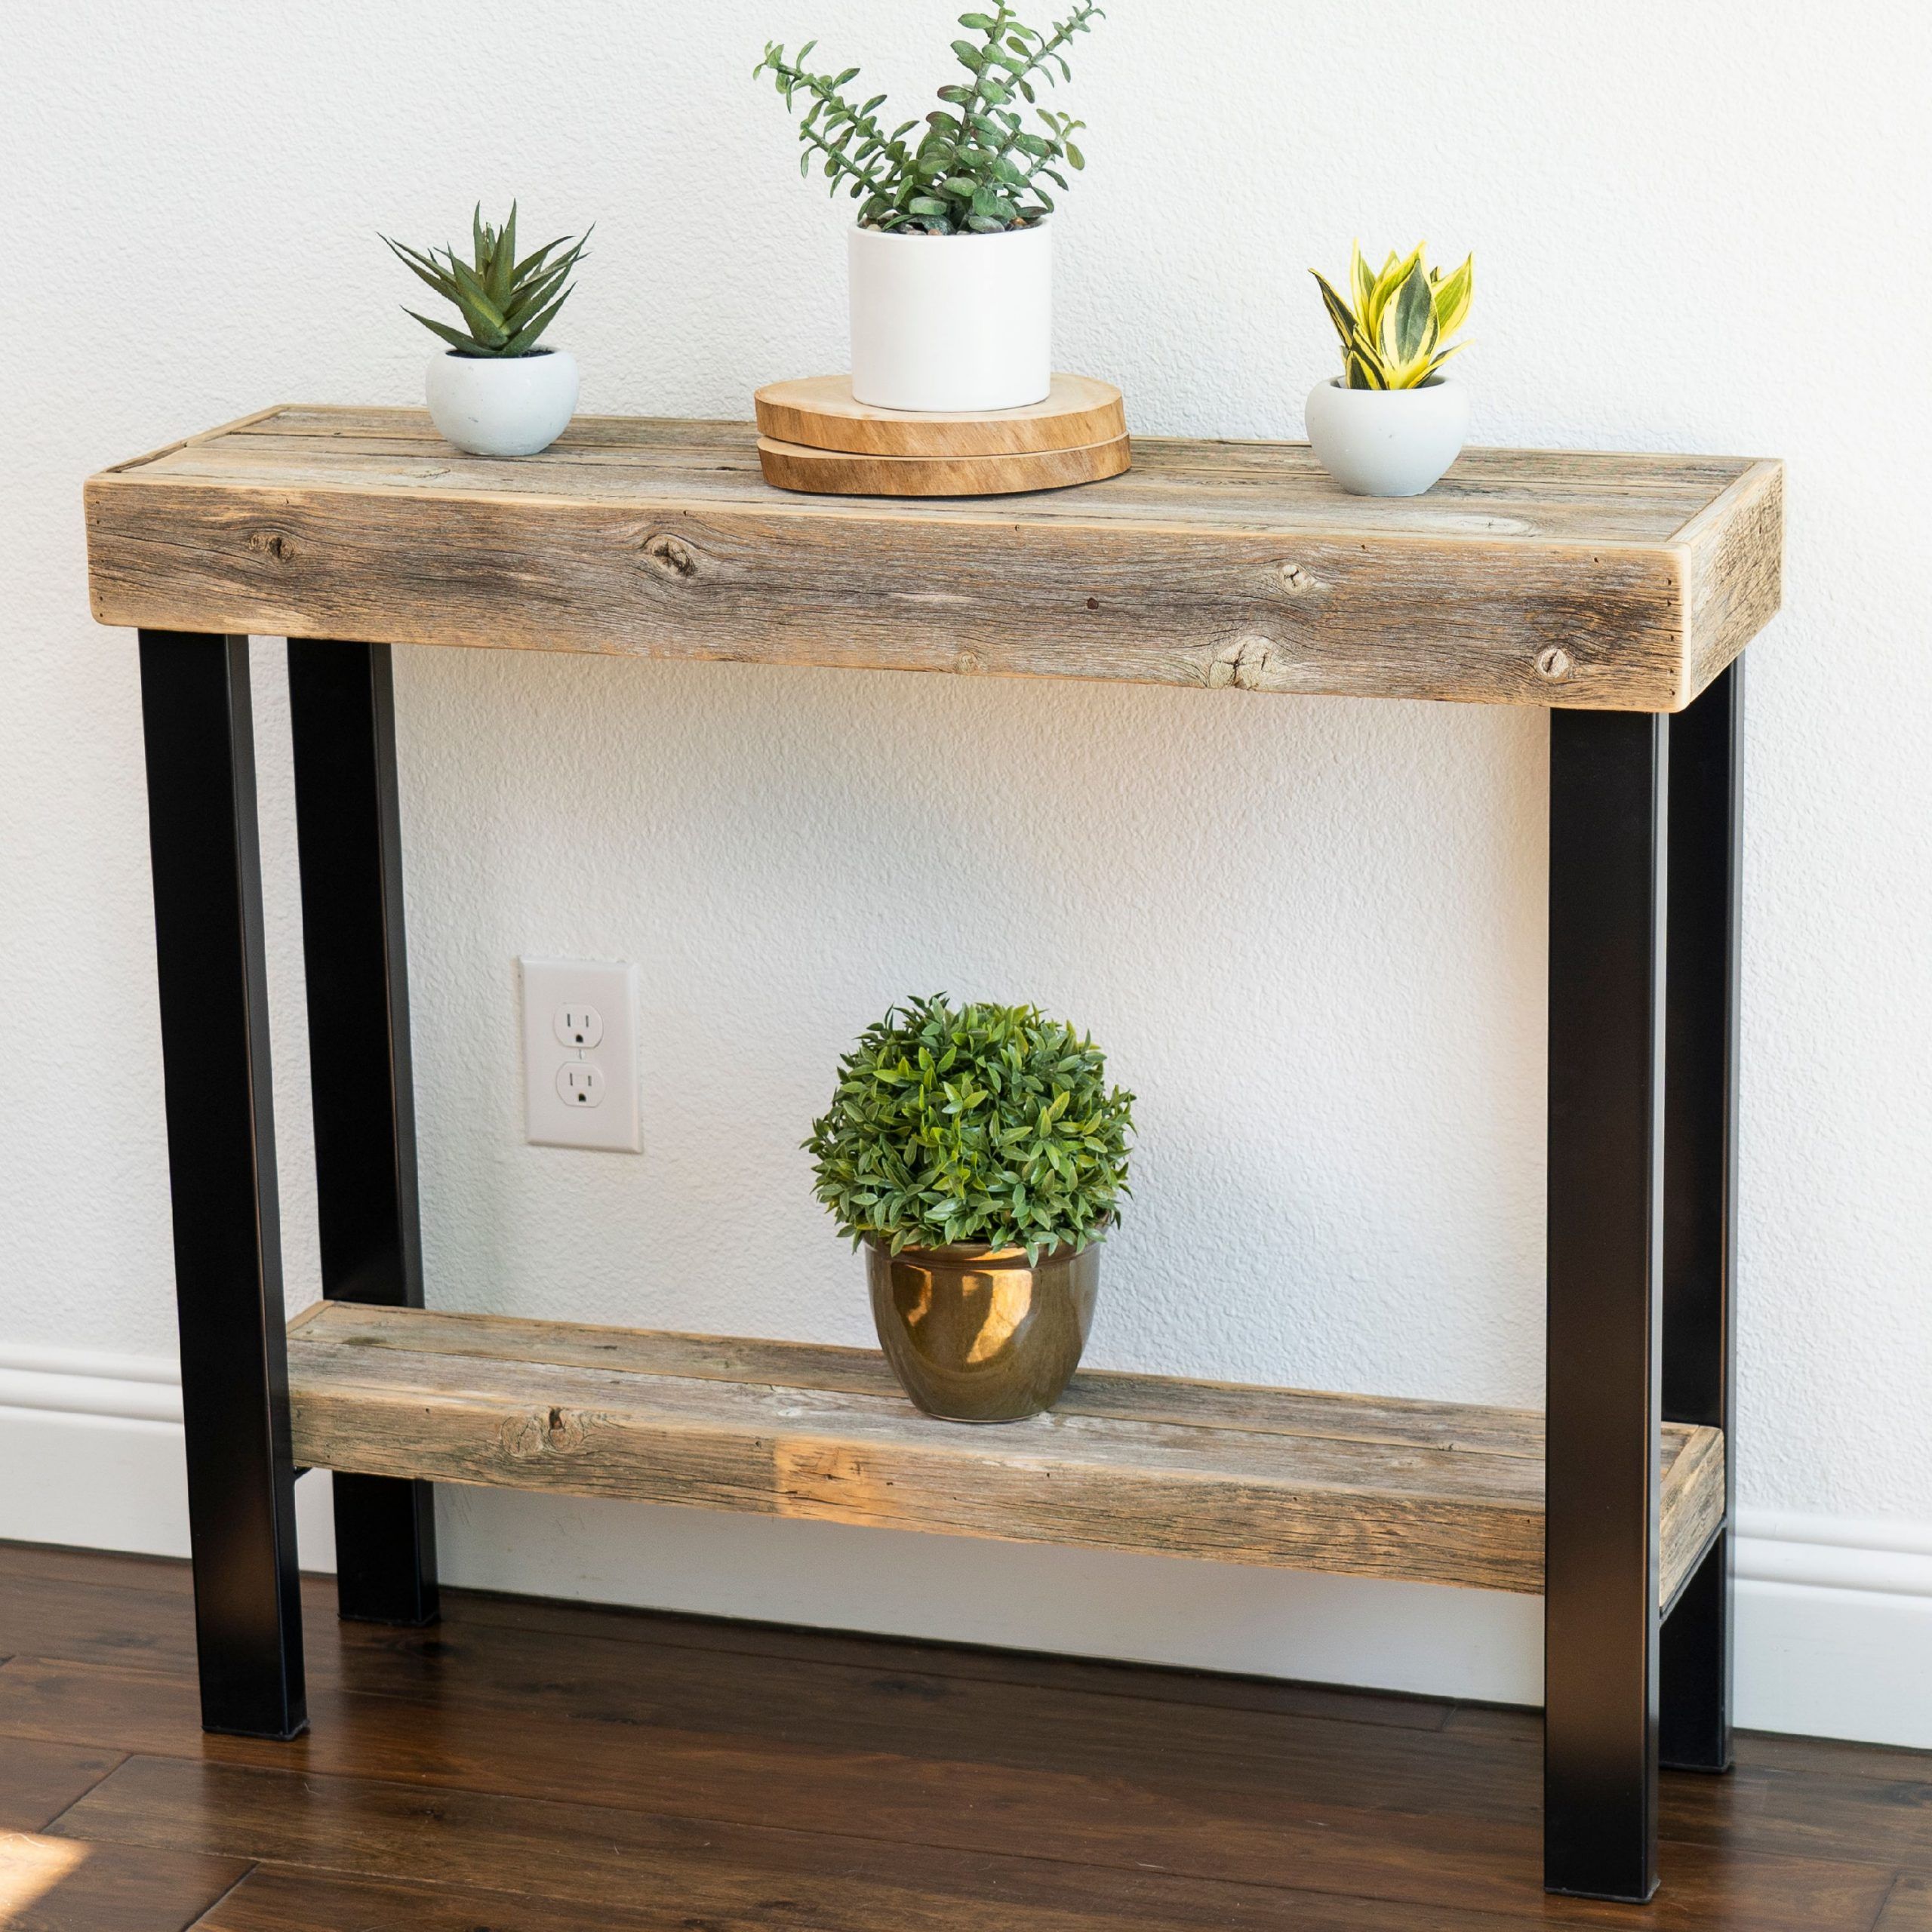 Roland Small Living Room Console Table, Reclaimed Wood W For Caviar Black Console Tables (View 3 of 20)